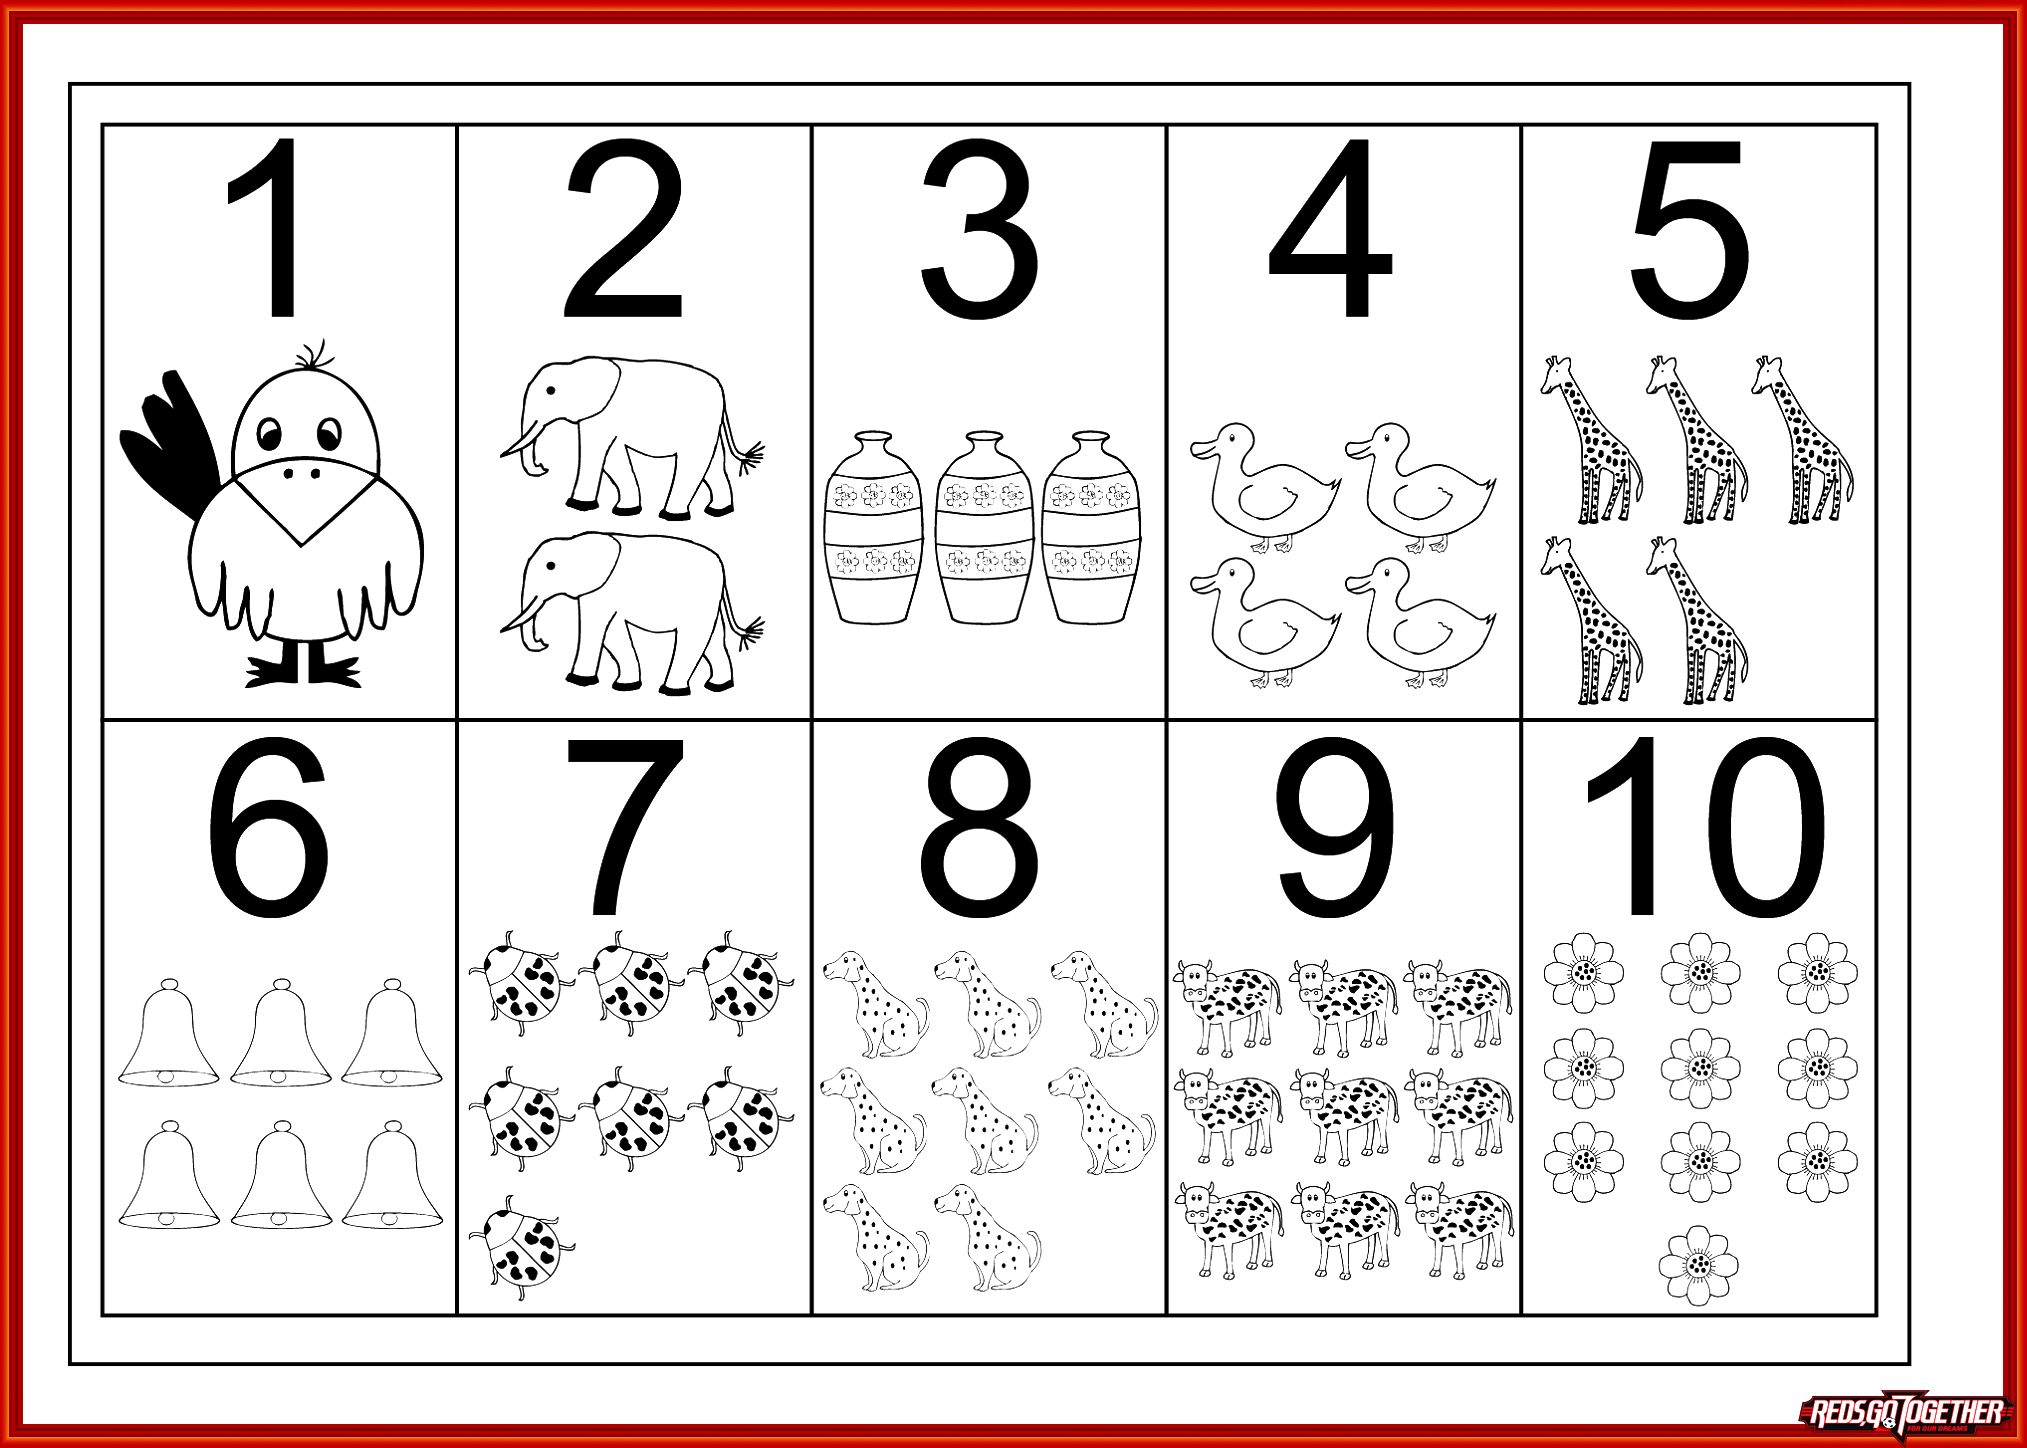 1 to 10 Numbers PNG Transparent Images.